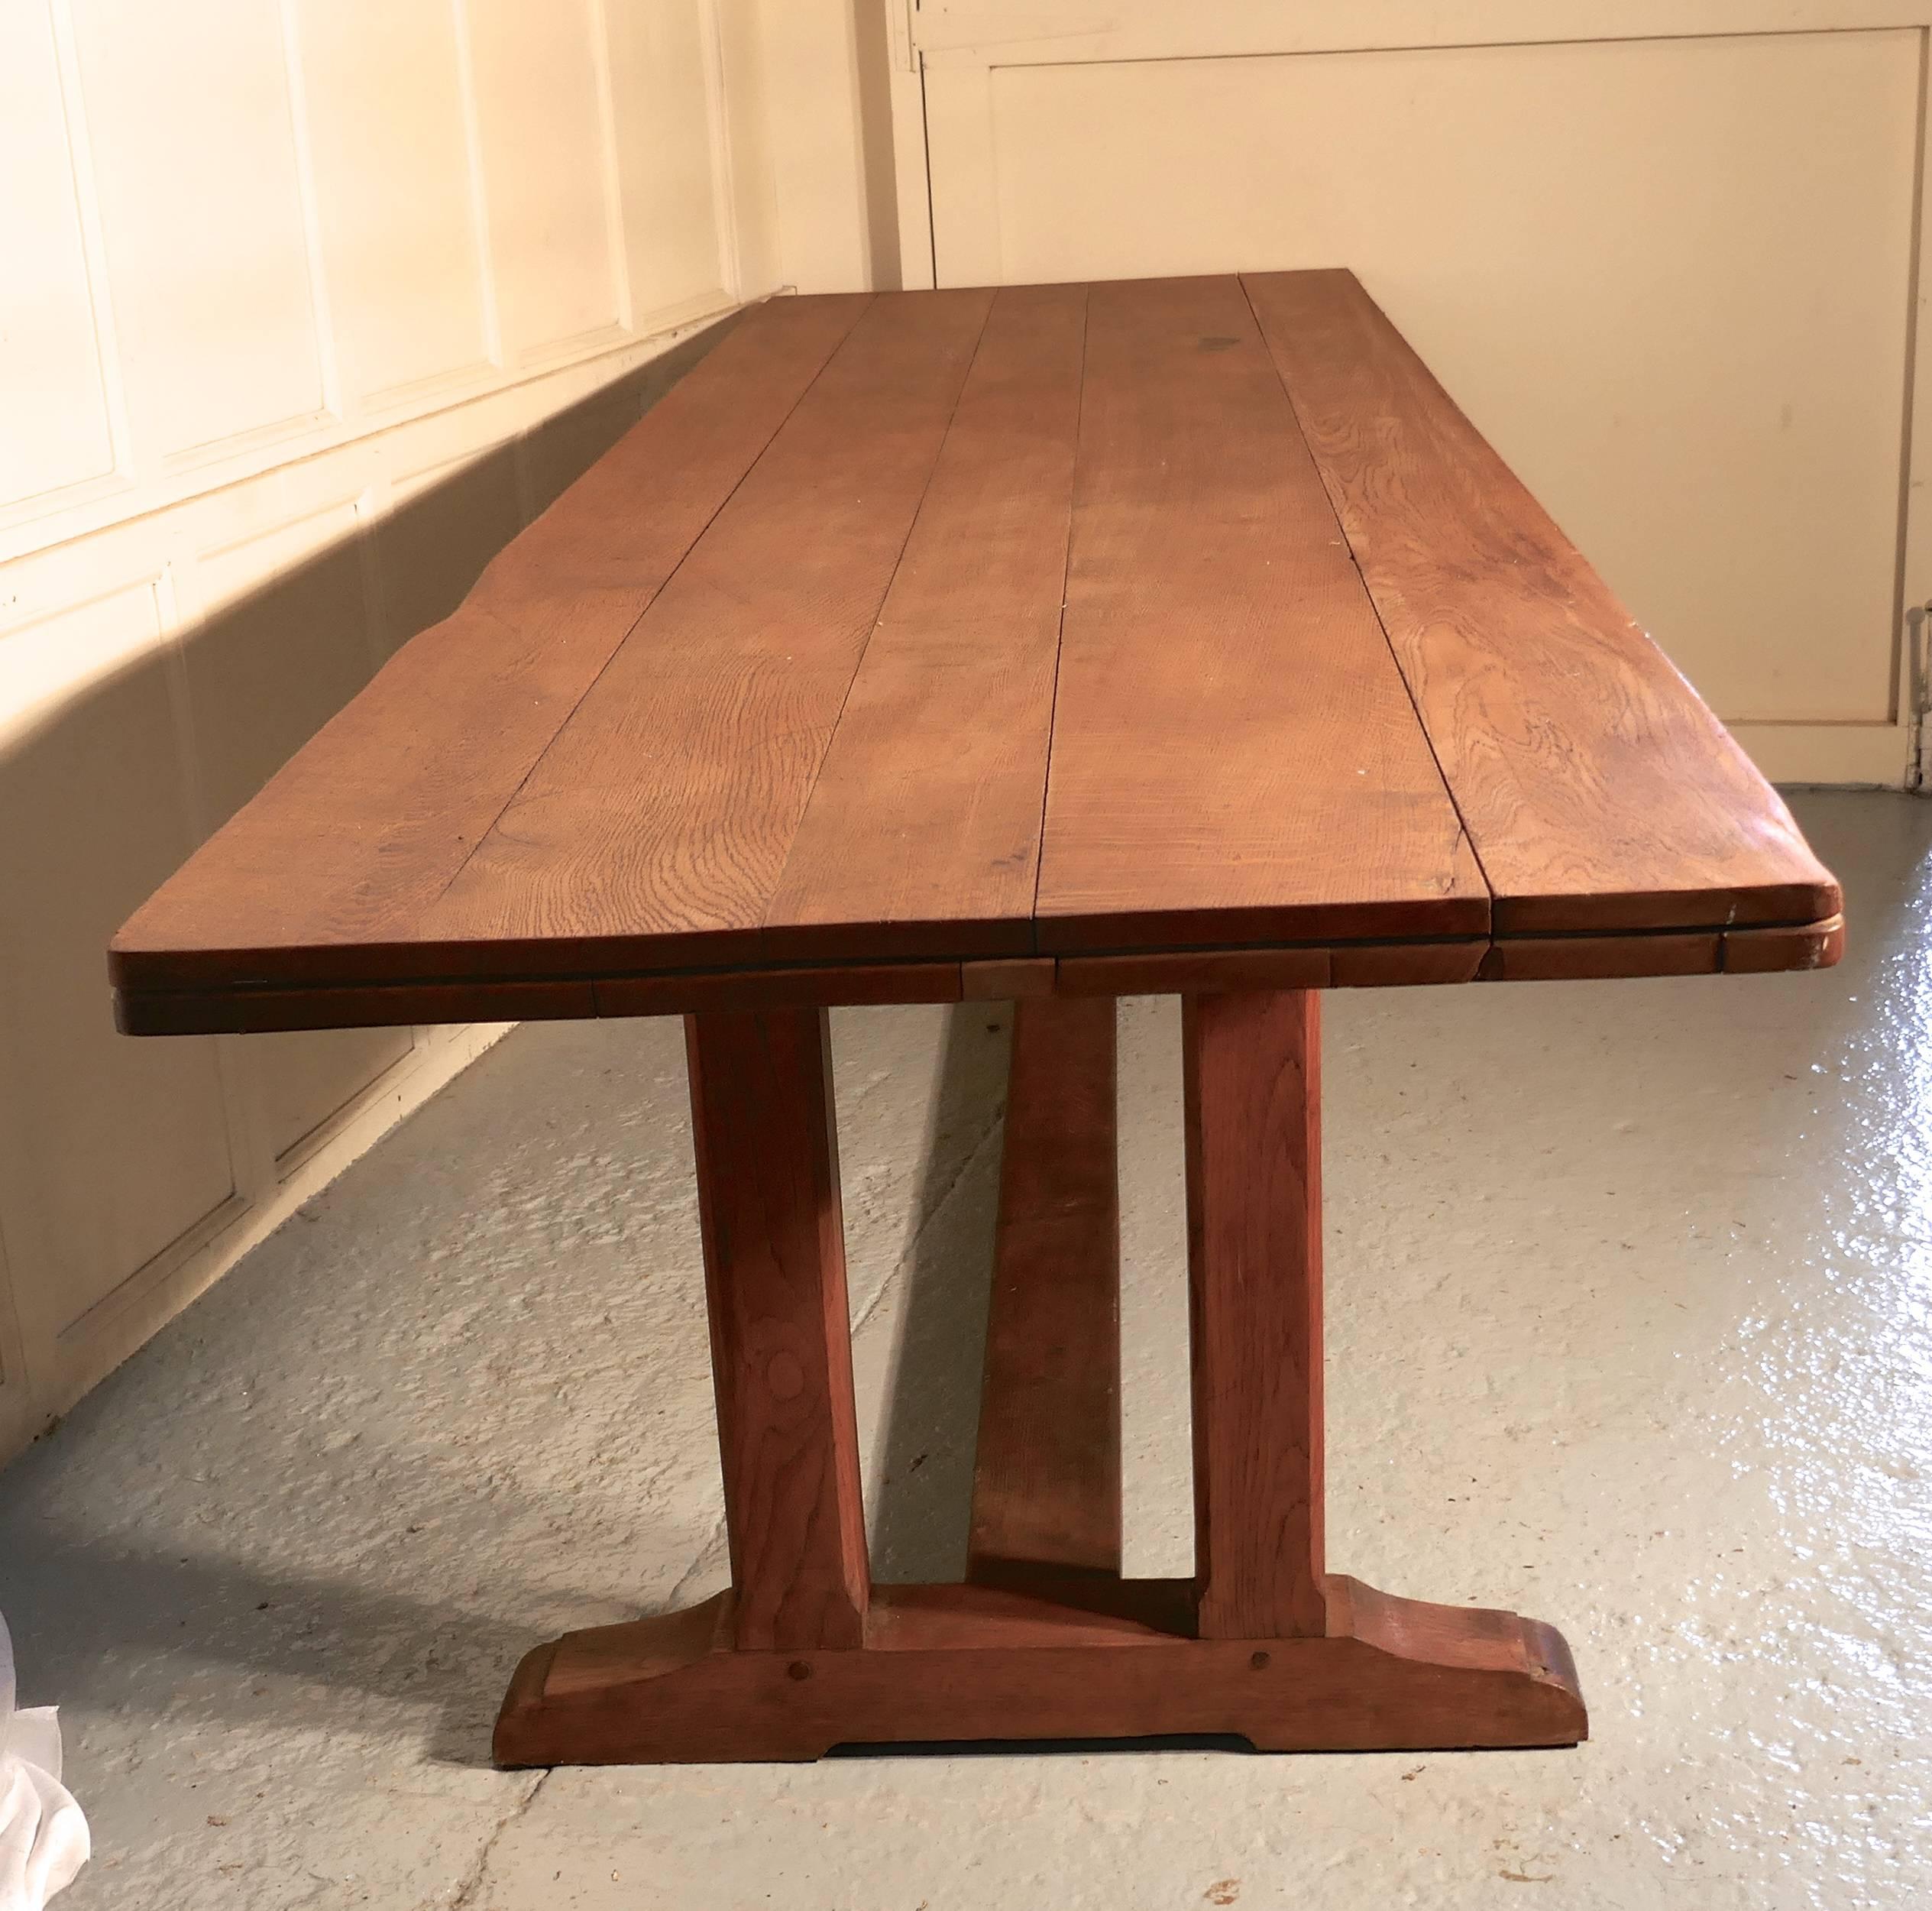 Huge 19th century Arts & Crafts golden oak refectory table

This is a very large table, it has a beautiful five plank oak which is 2” thick
The table legs are in the refectory style with 4” double leg at each end, these are joined with a 5”